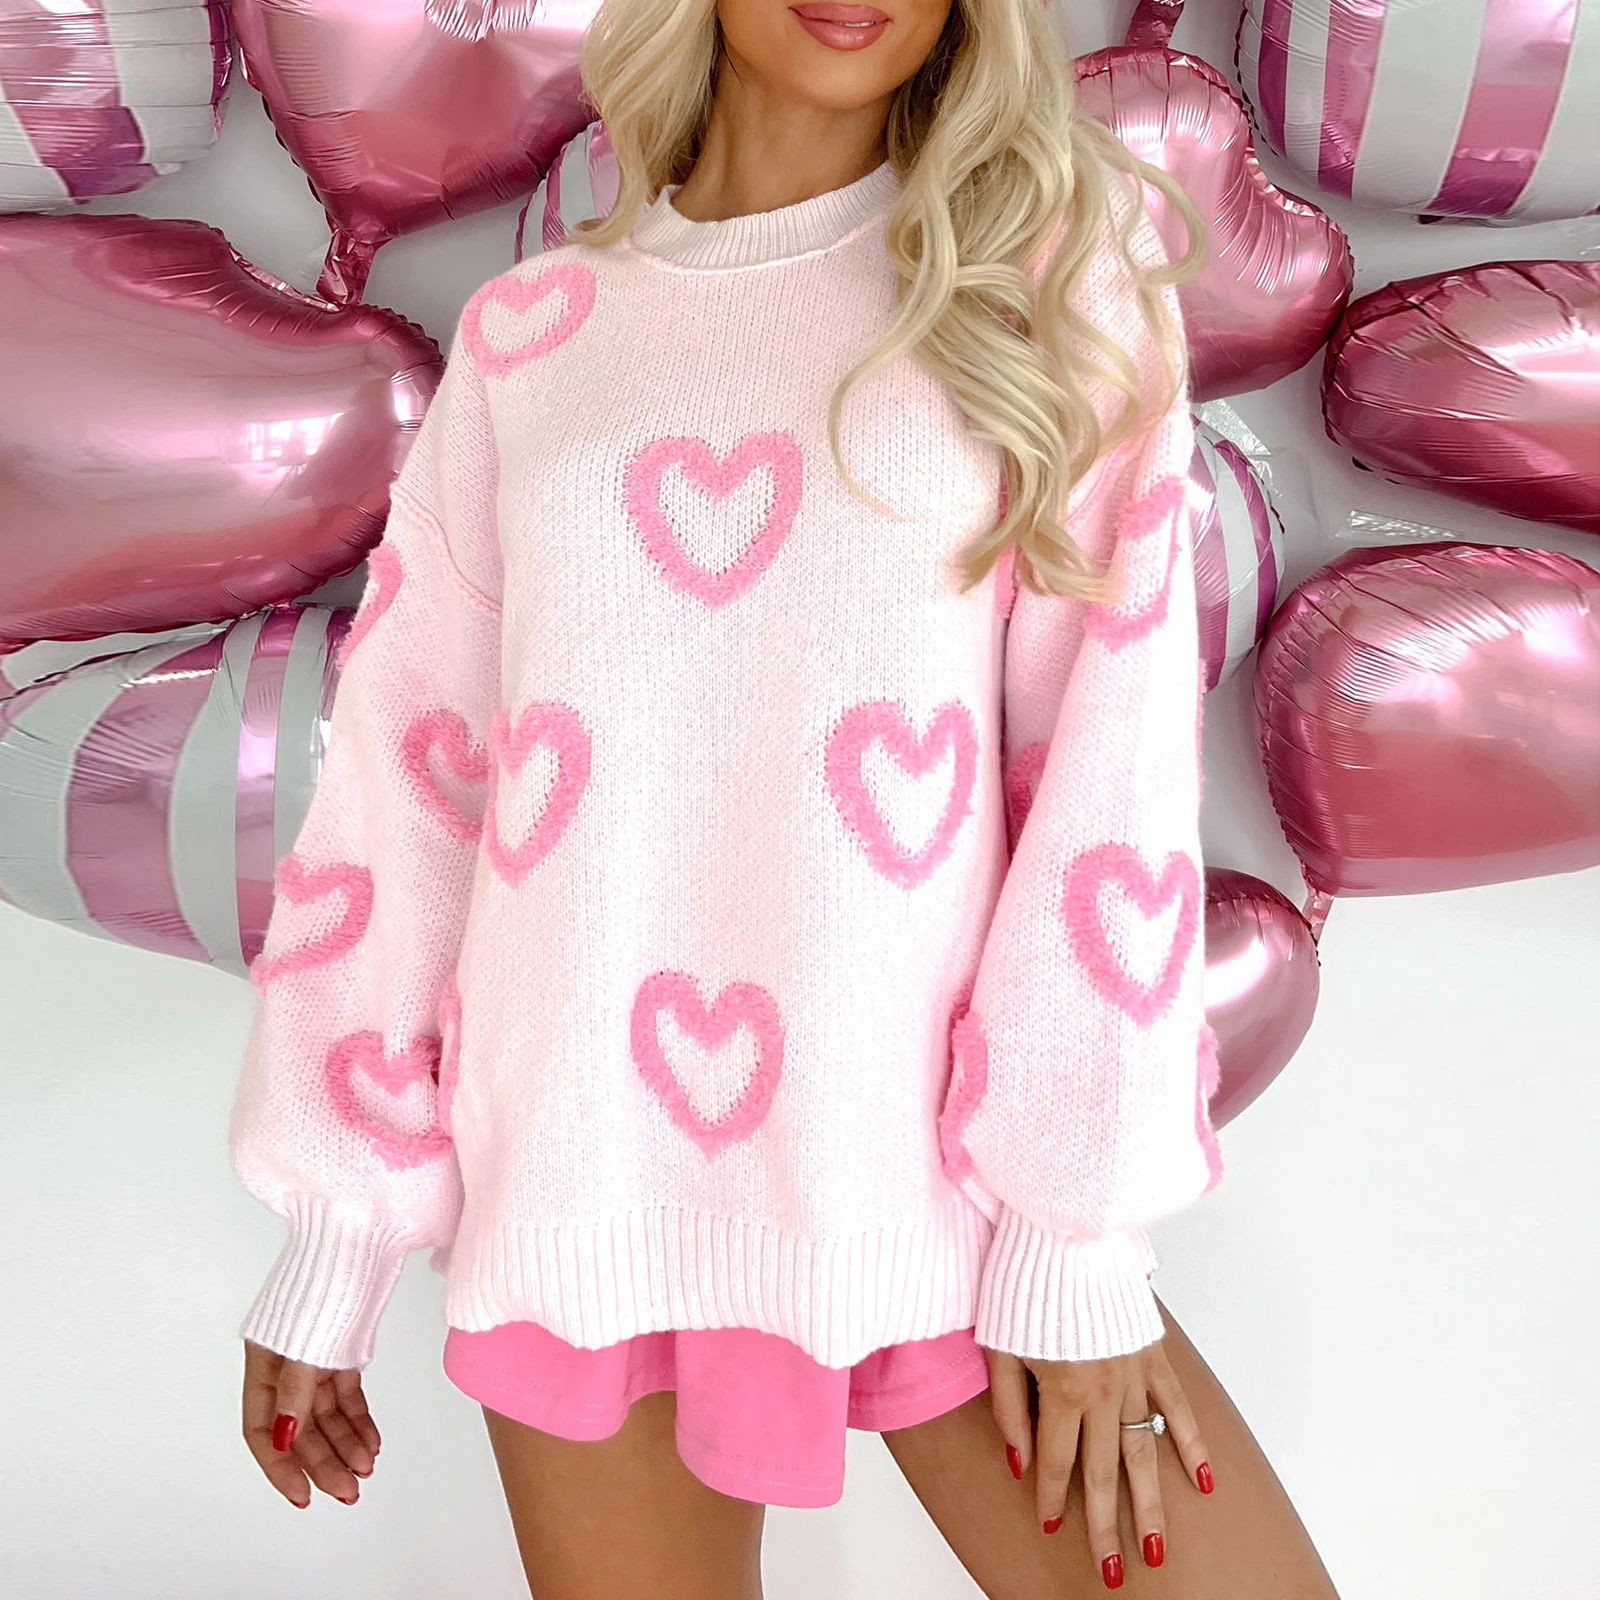 

Women's Heart Sweater Fuzzy Long Sleeve Round Neck Pullover Tops Fall Winter Fashion Casual Knitwear Valentine's Day Sweater